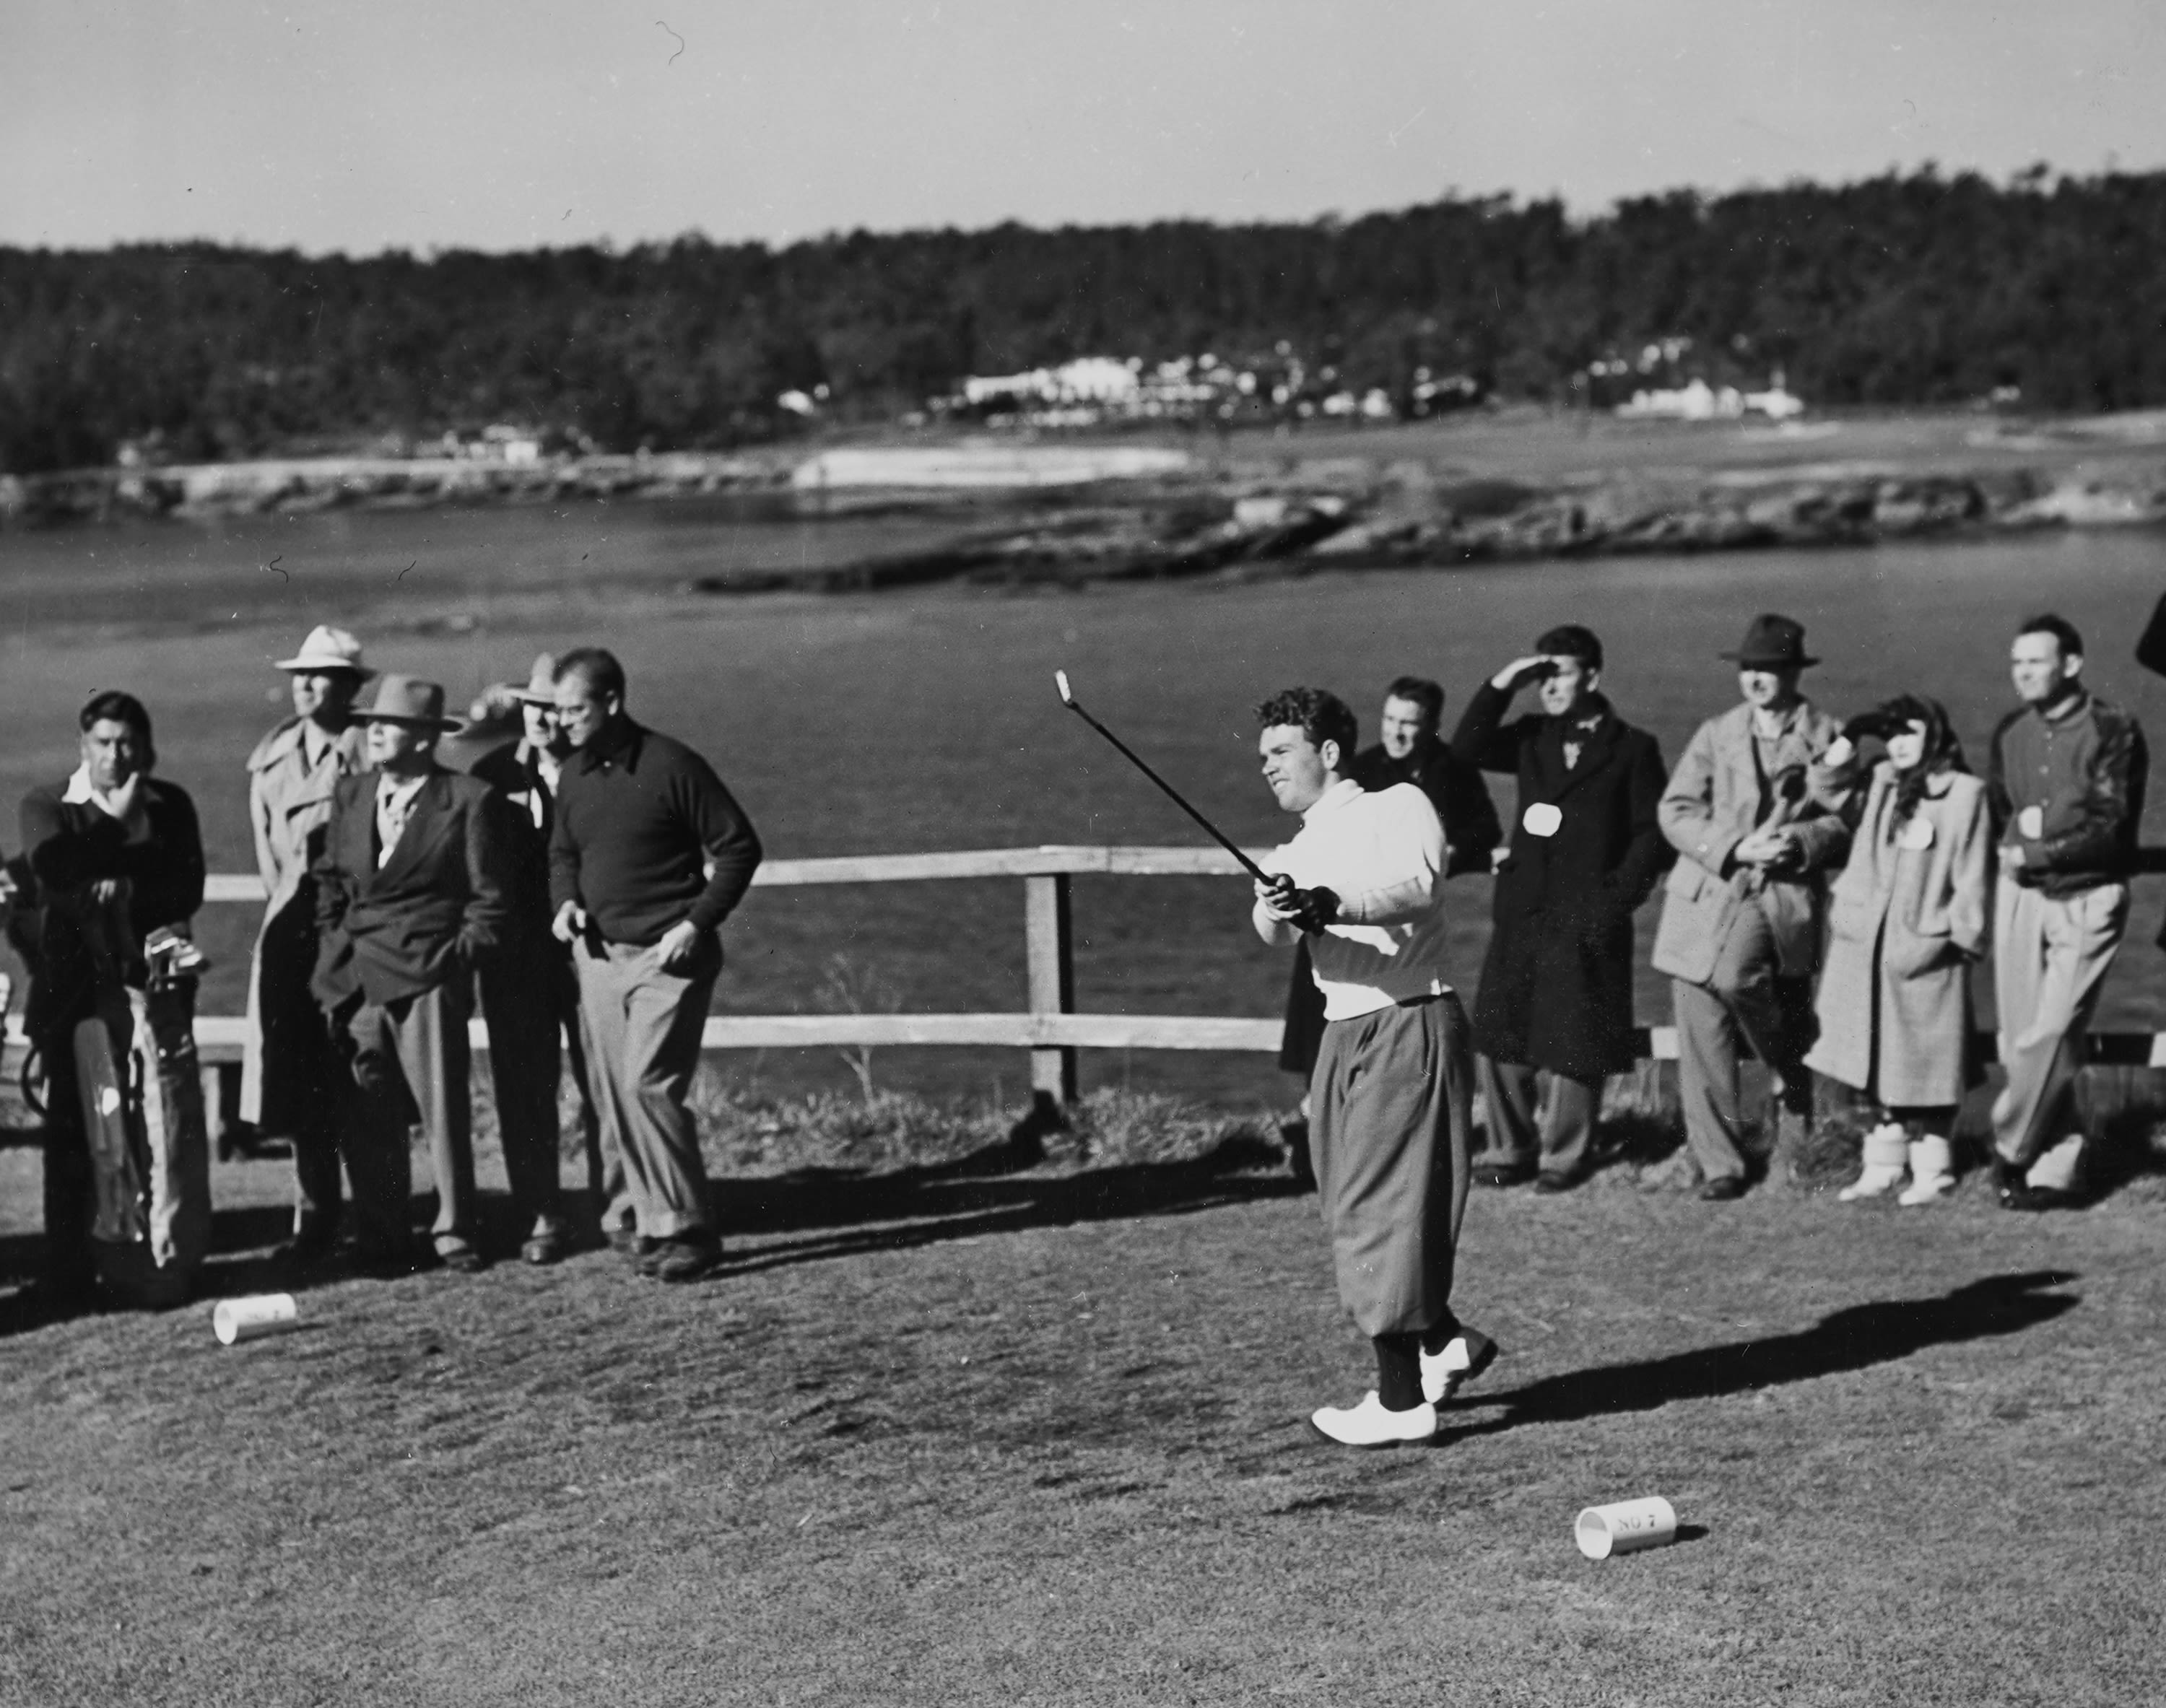 Golf's greatest players, like 1956 PGA Champion Jack Burke Jr., have all experienced the magic of Pebble Beach.